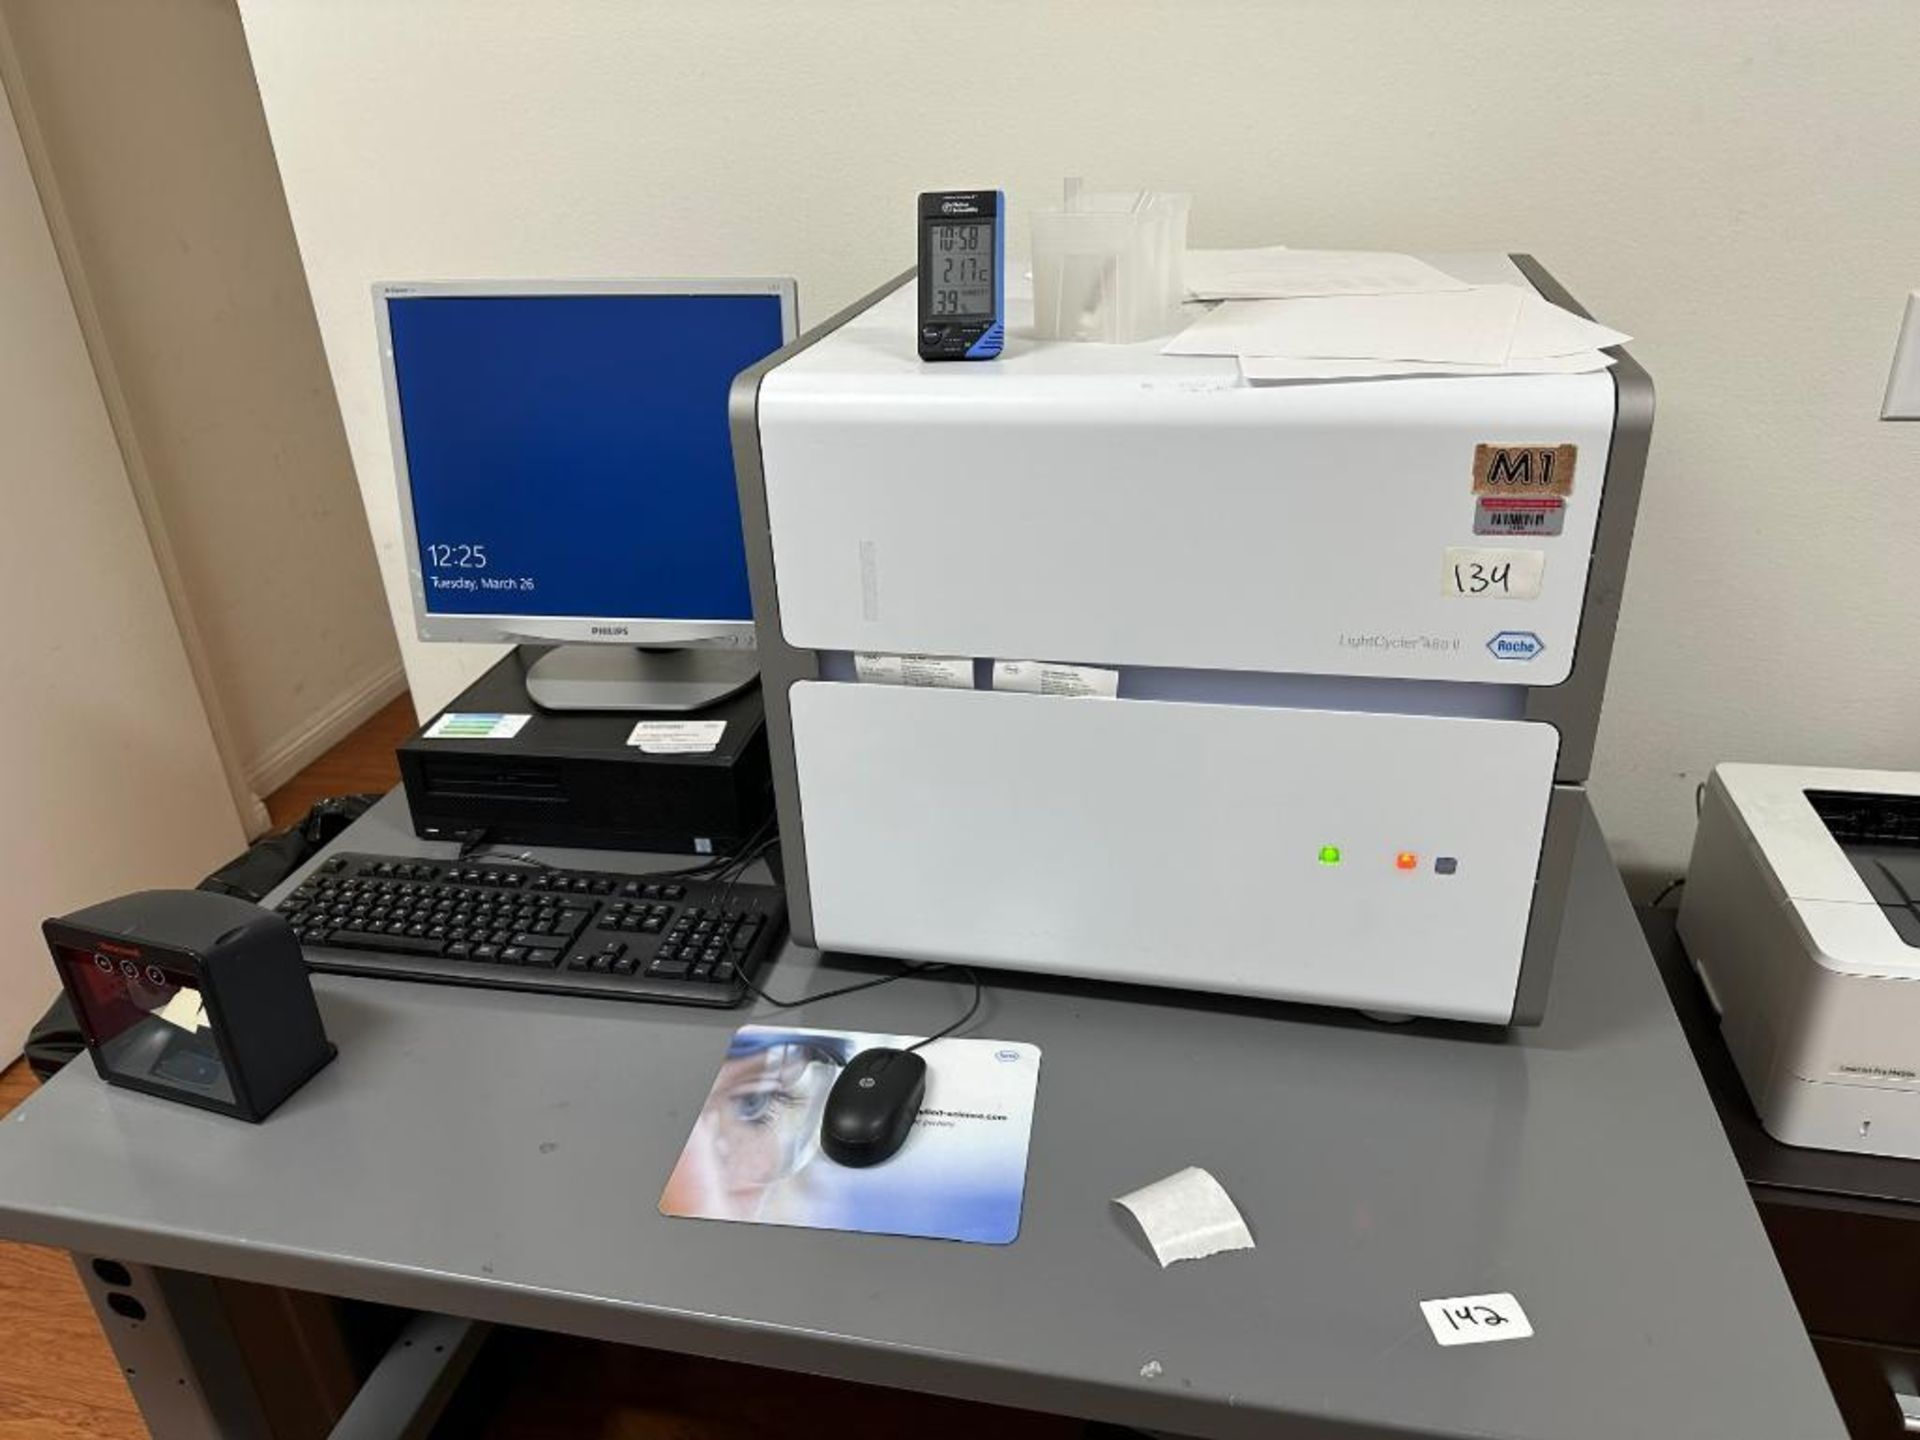 ROCHE LIGHTCYCLER 480 II PCR SYSTEM; PCR THERMAL CYCLER SYSTEM